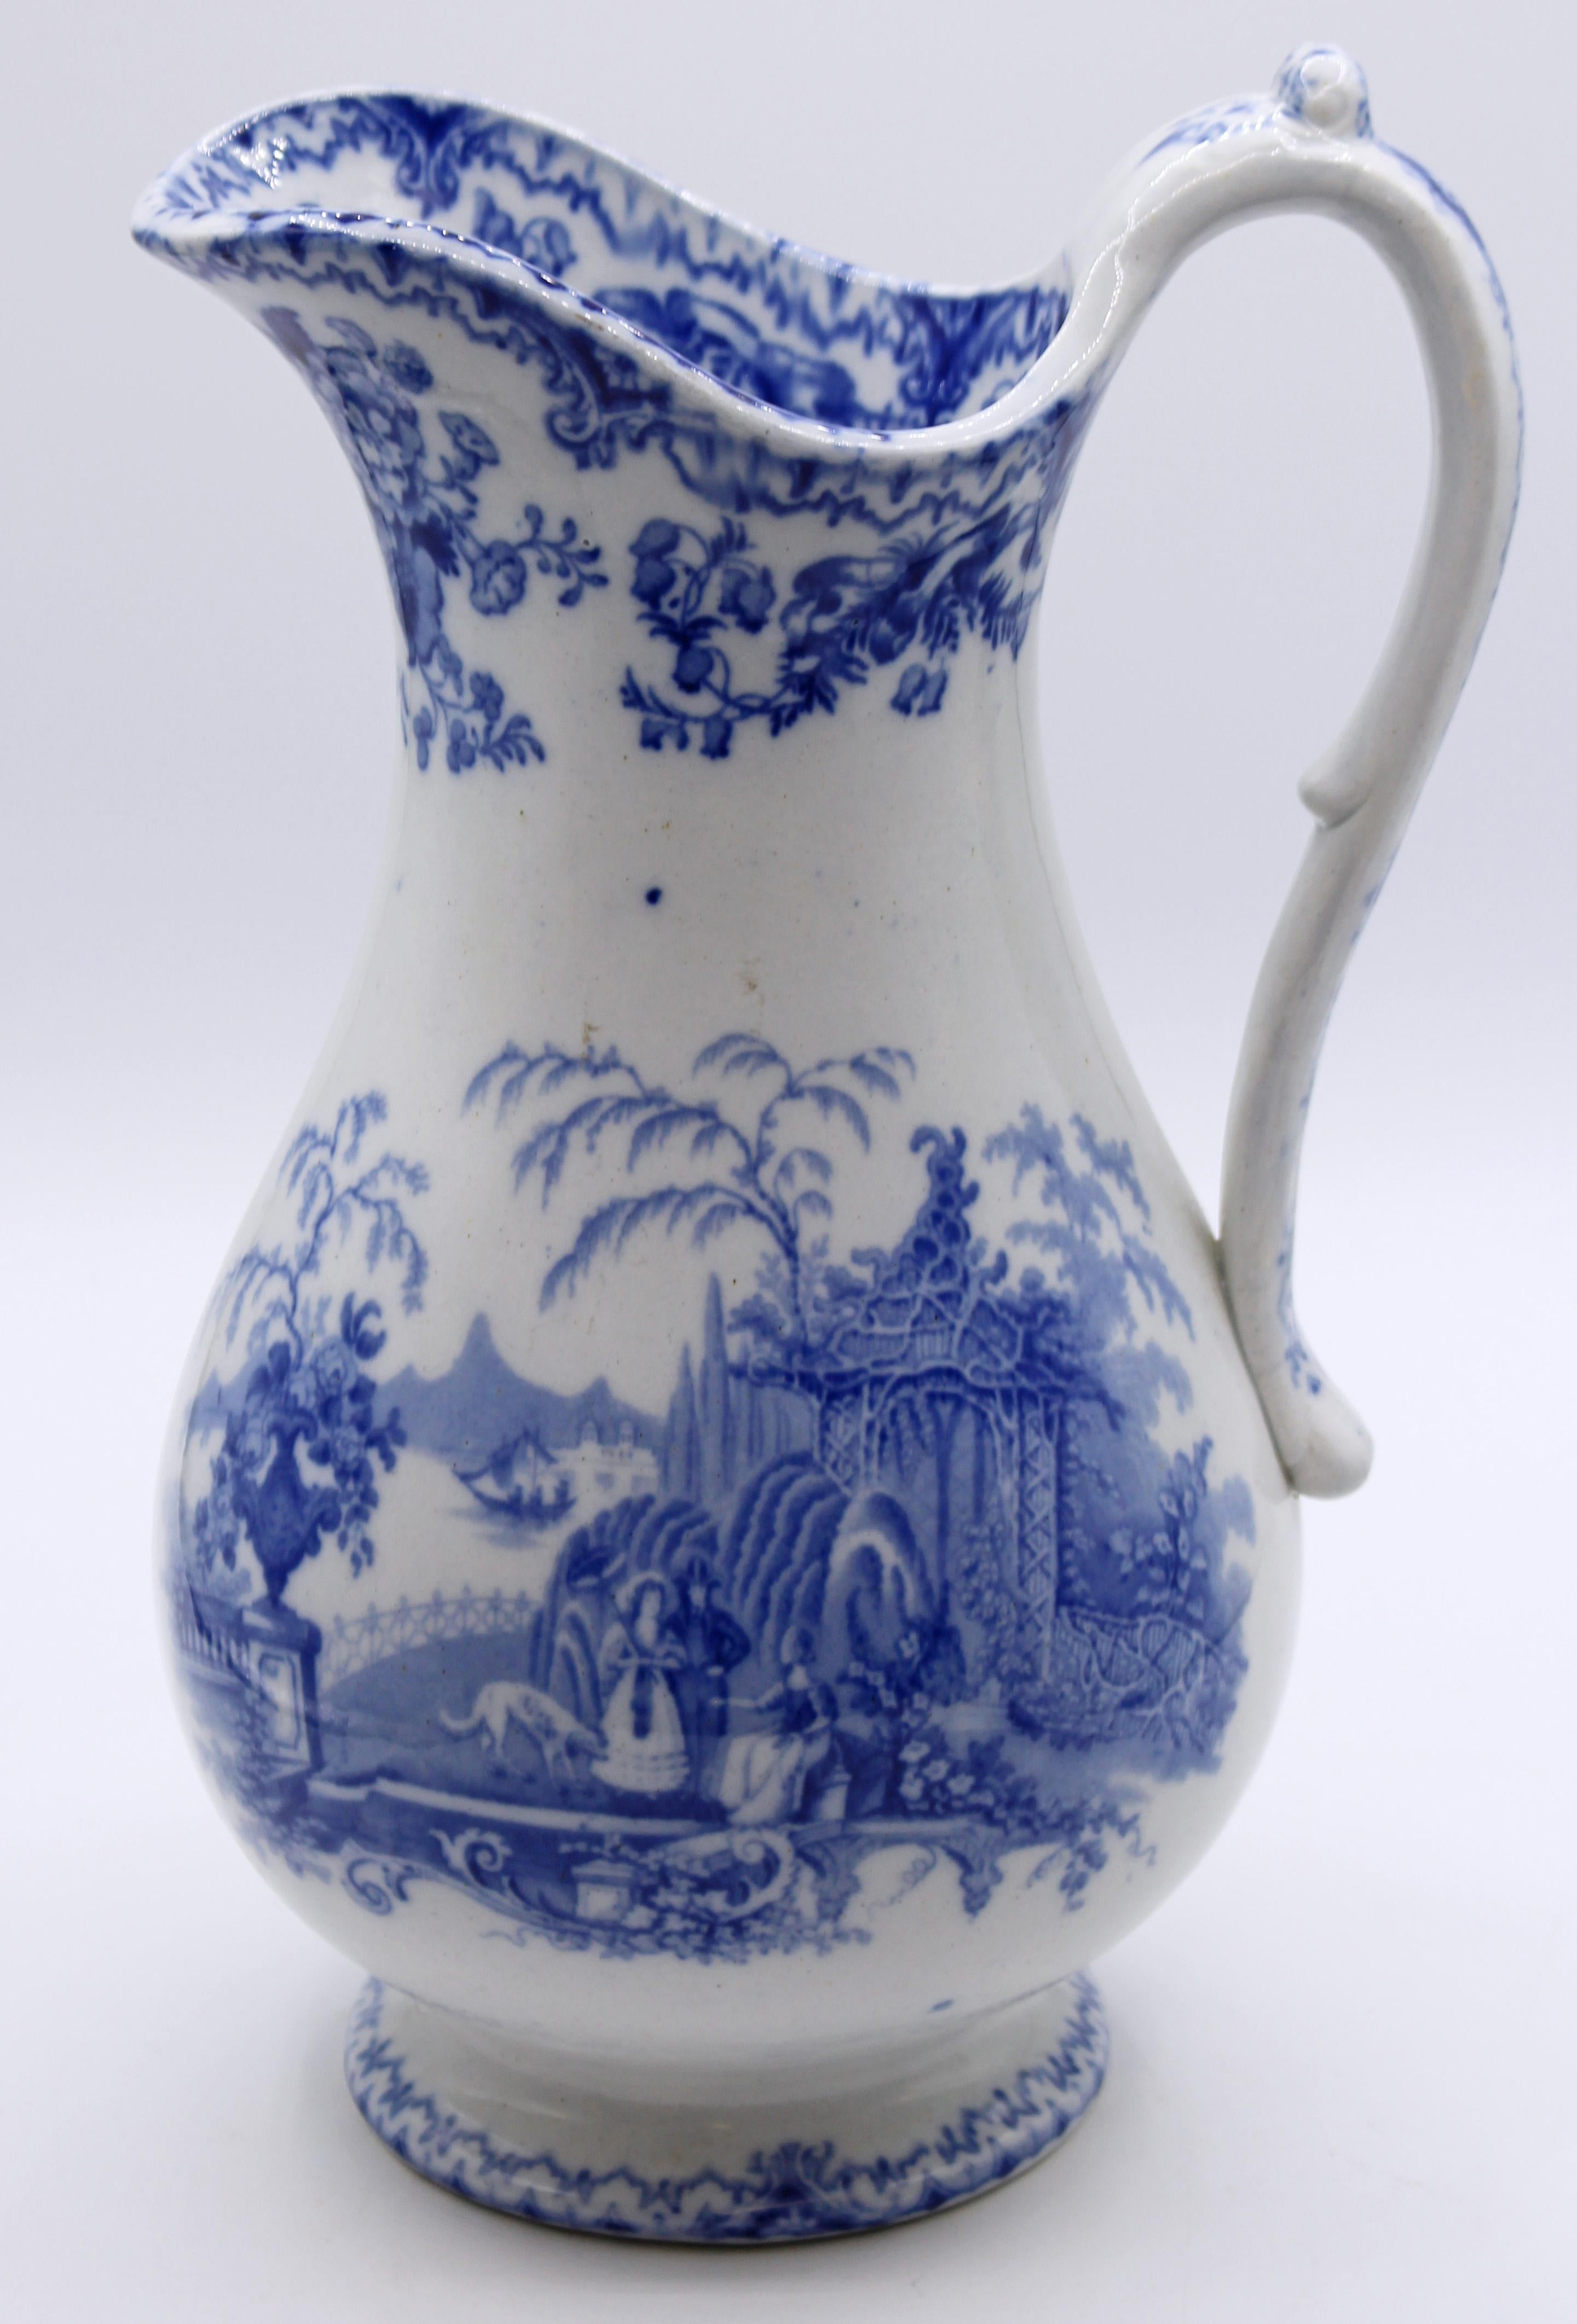 Blue and white transferware pitcher, c.1880, romantic scene. Each side with romanticized views of Westerners in a Chinese setting. 12 7/8